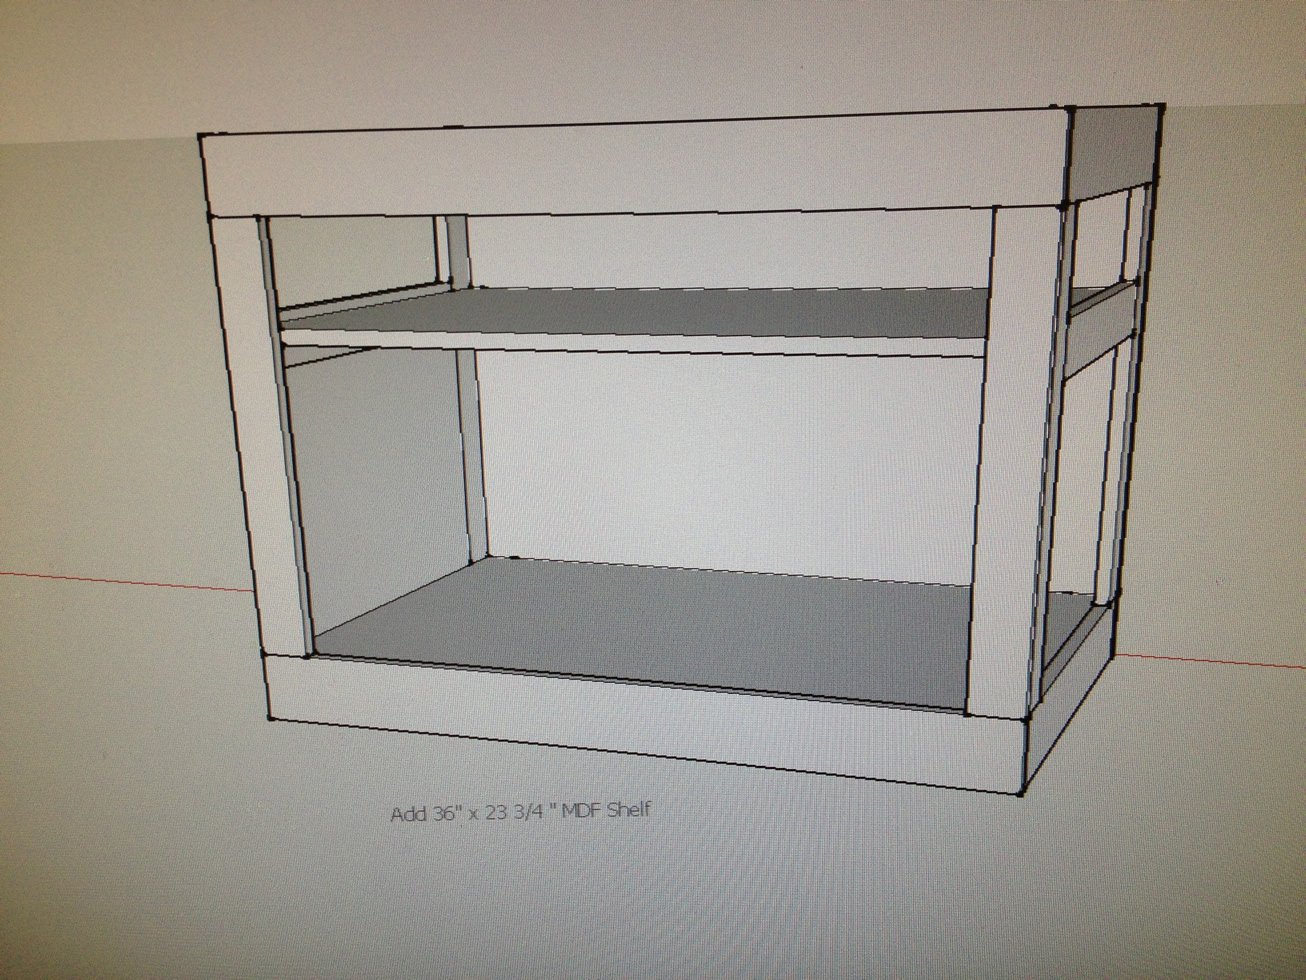 workbench plans dimensions